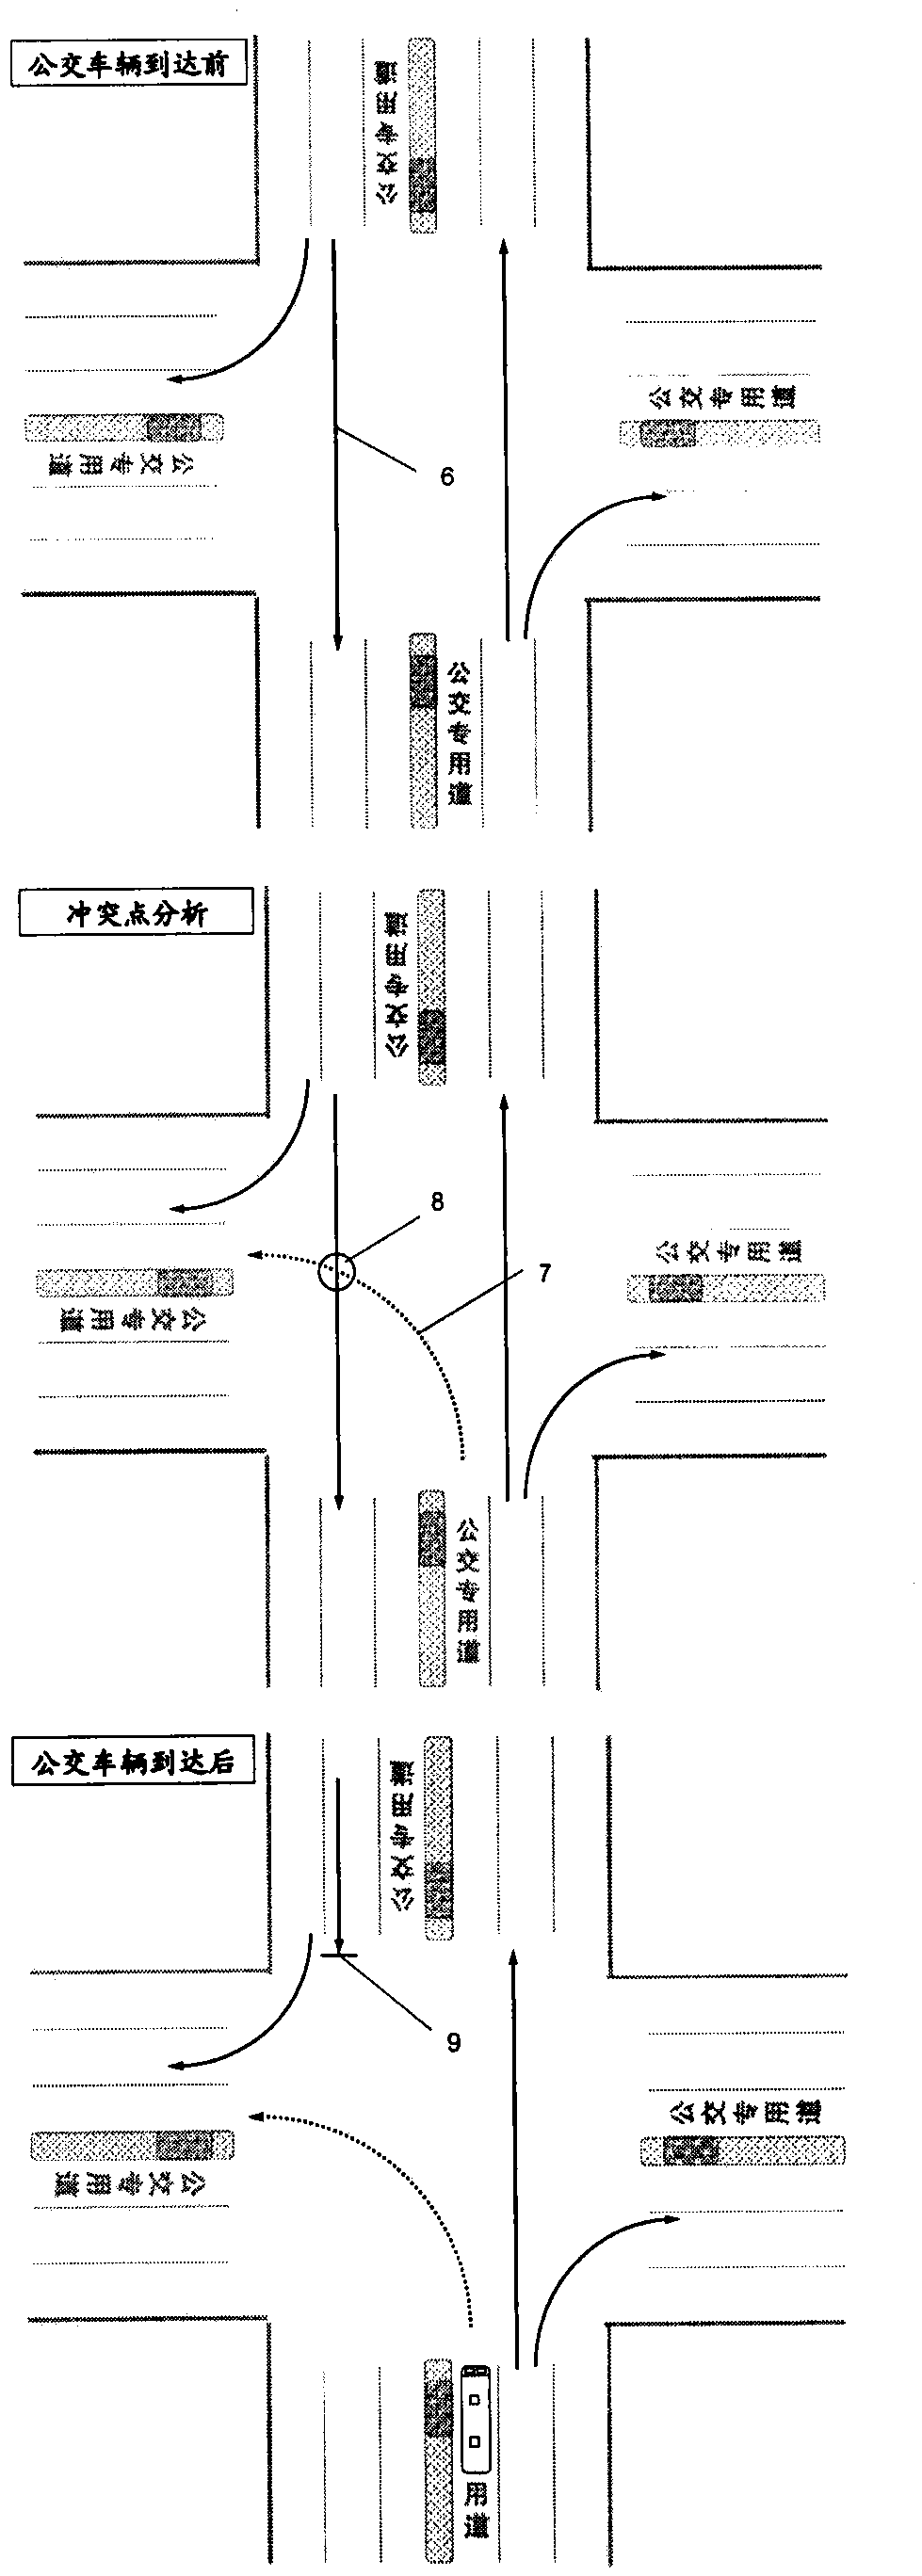 Cooperative control method of left-opened-door bus special phase setting and social traffic flow